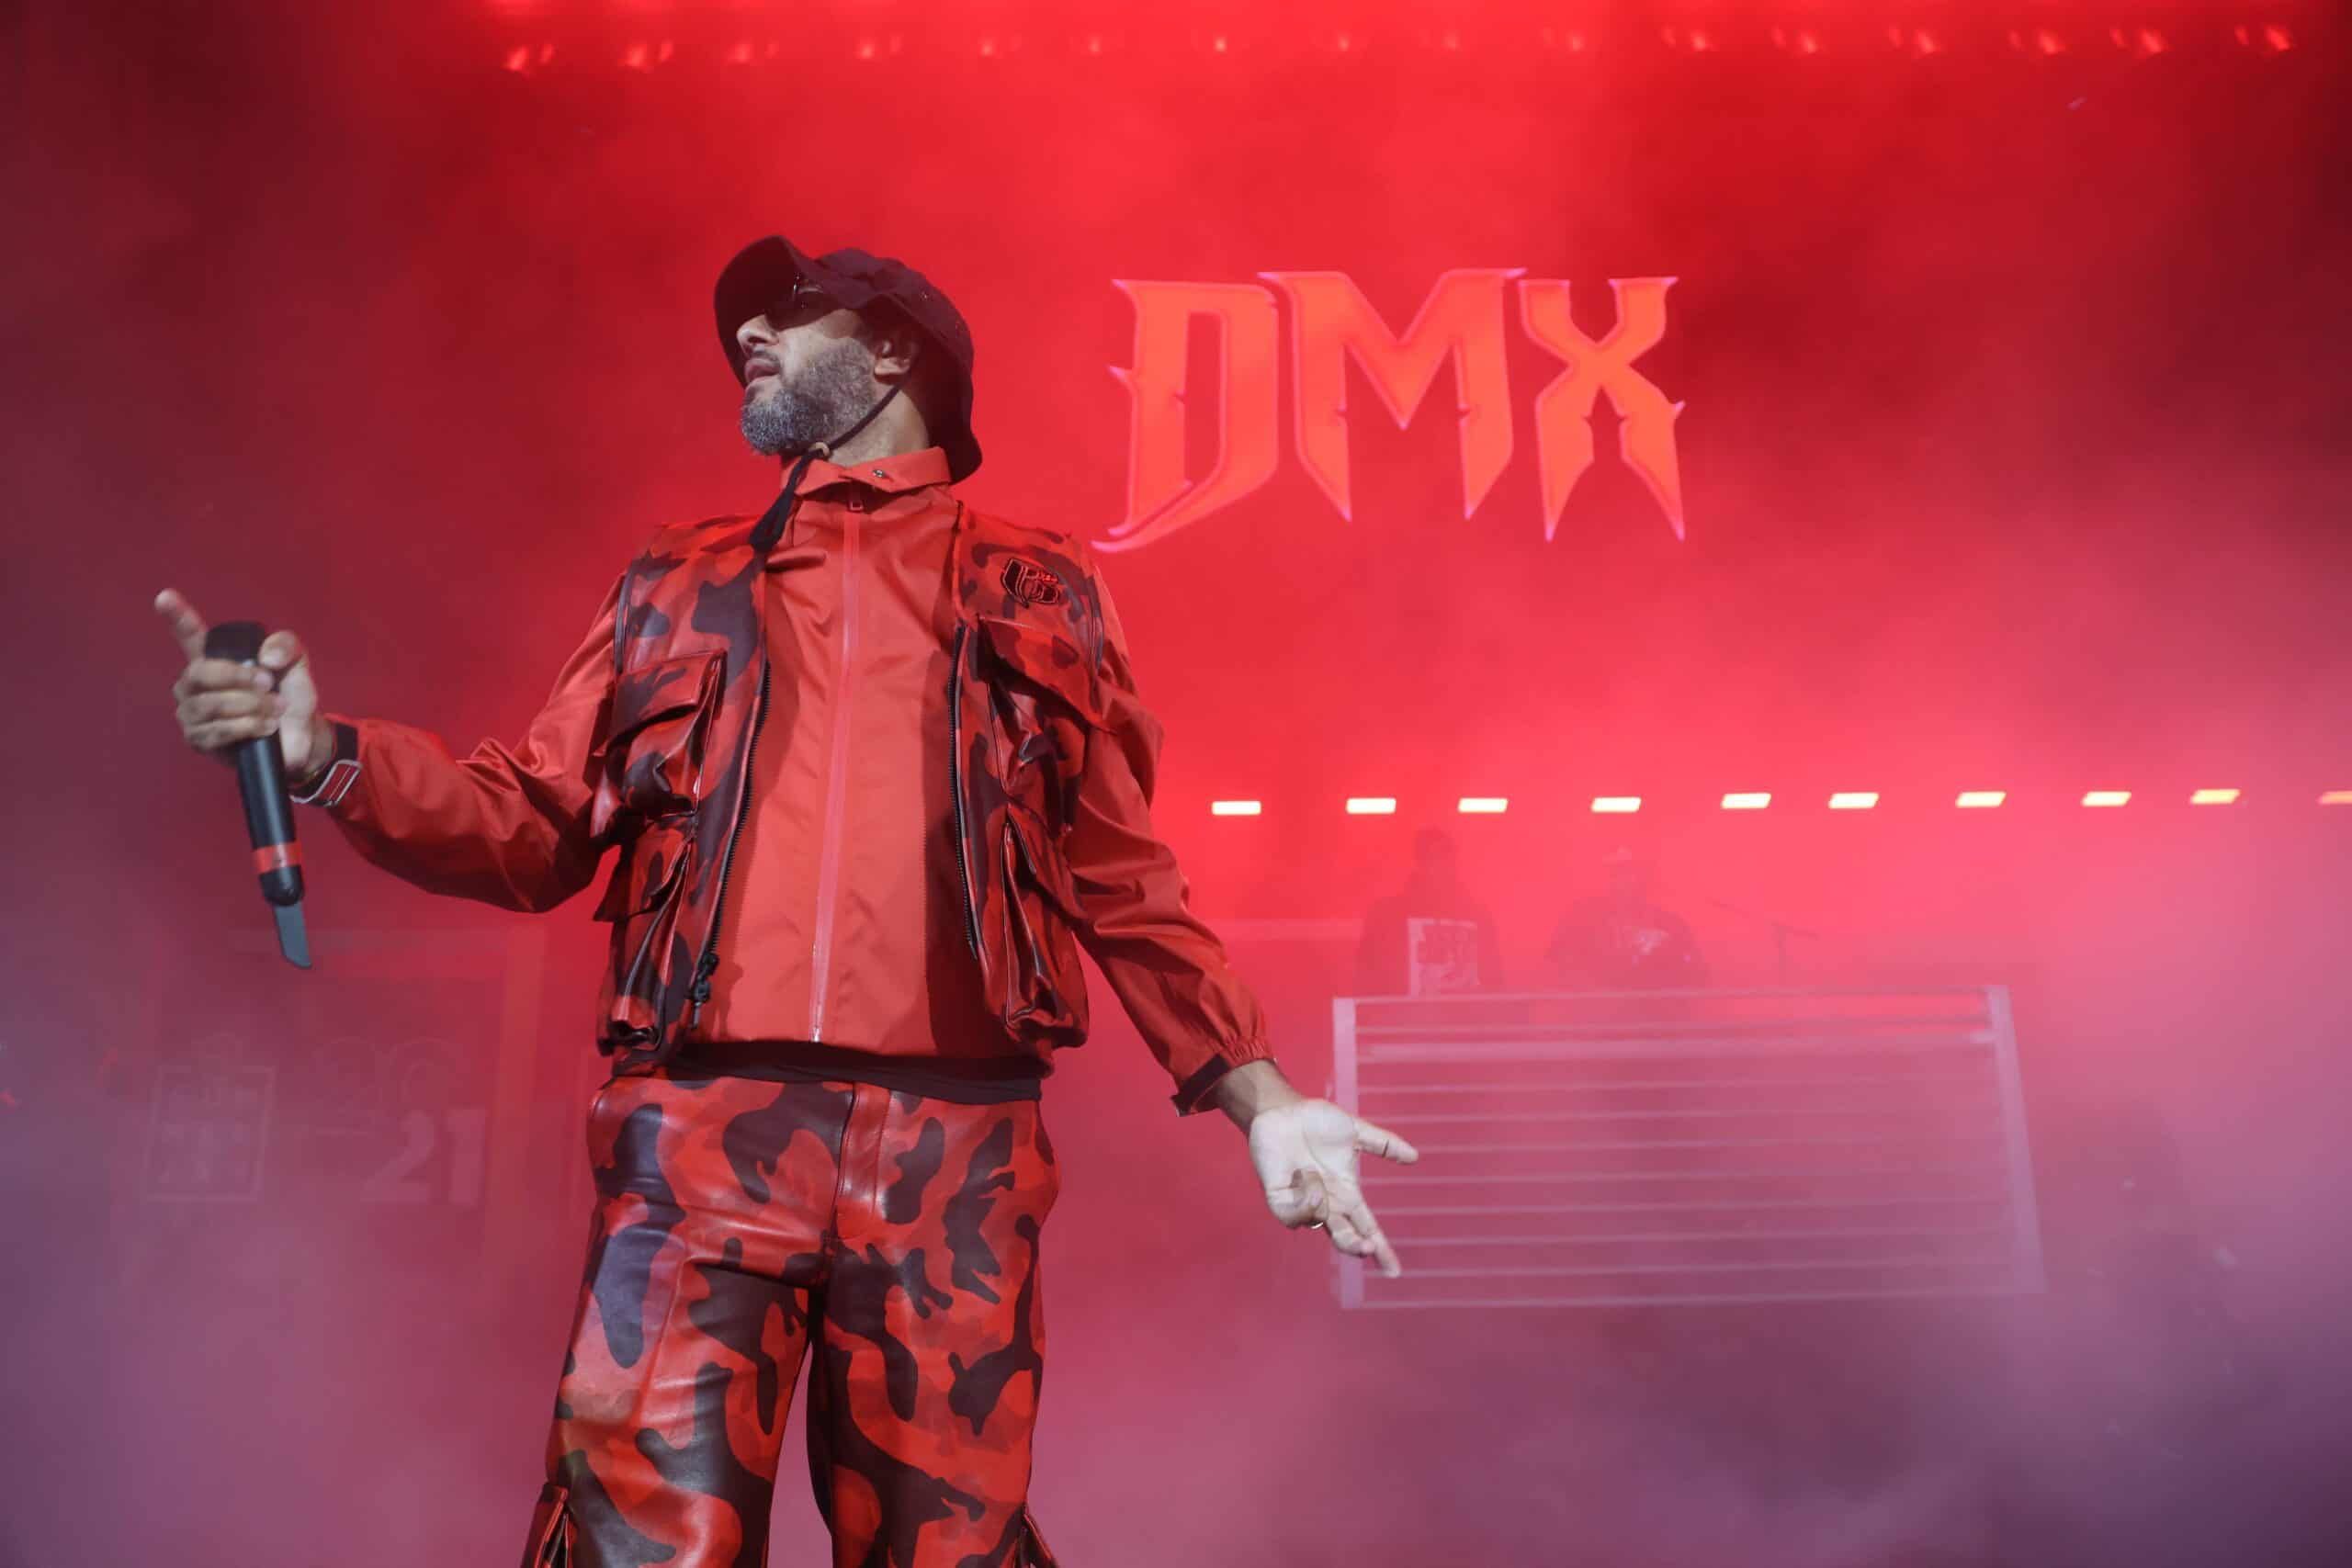 HOT 97 Summer Jam Returned To Make Hip Hop History With A. Boogie, Da Baby, Swizz Beatz: Dmx All-star Tribute, Migos, Surprise Guests Cardi B, Wu-Tang ...